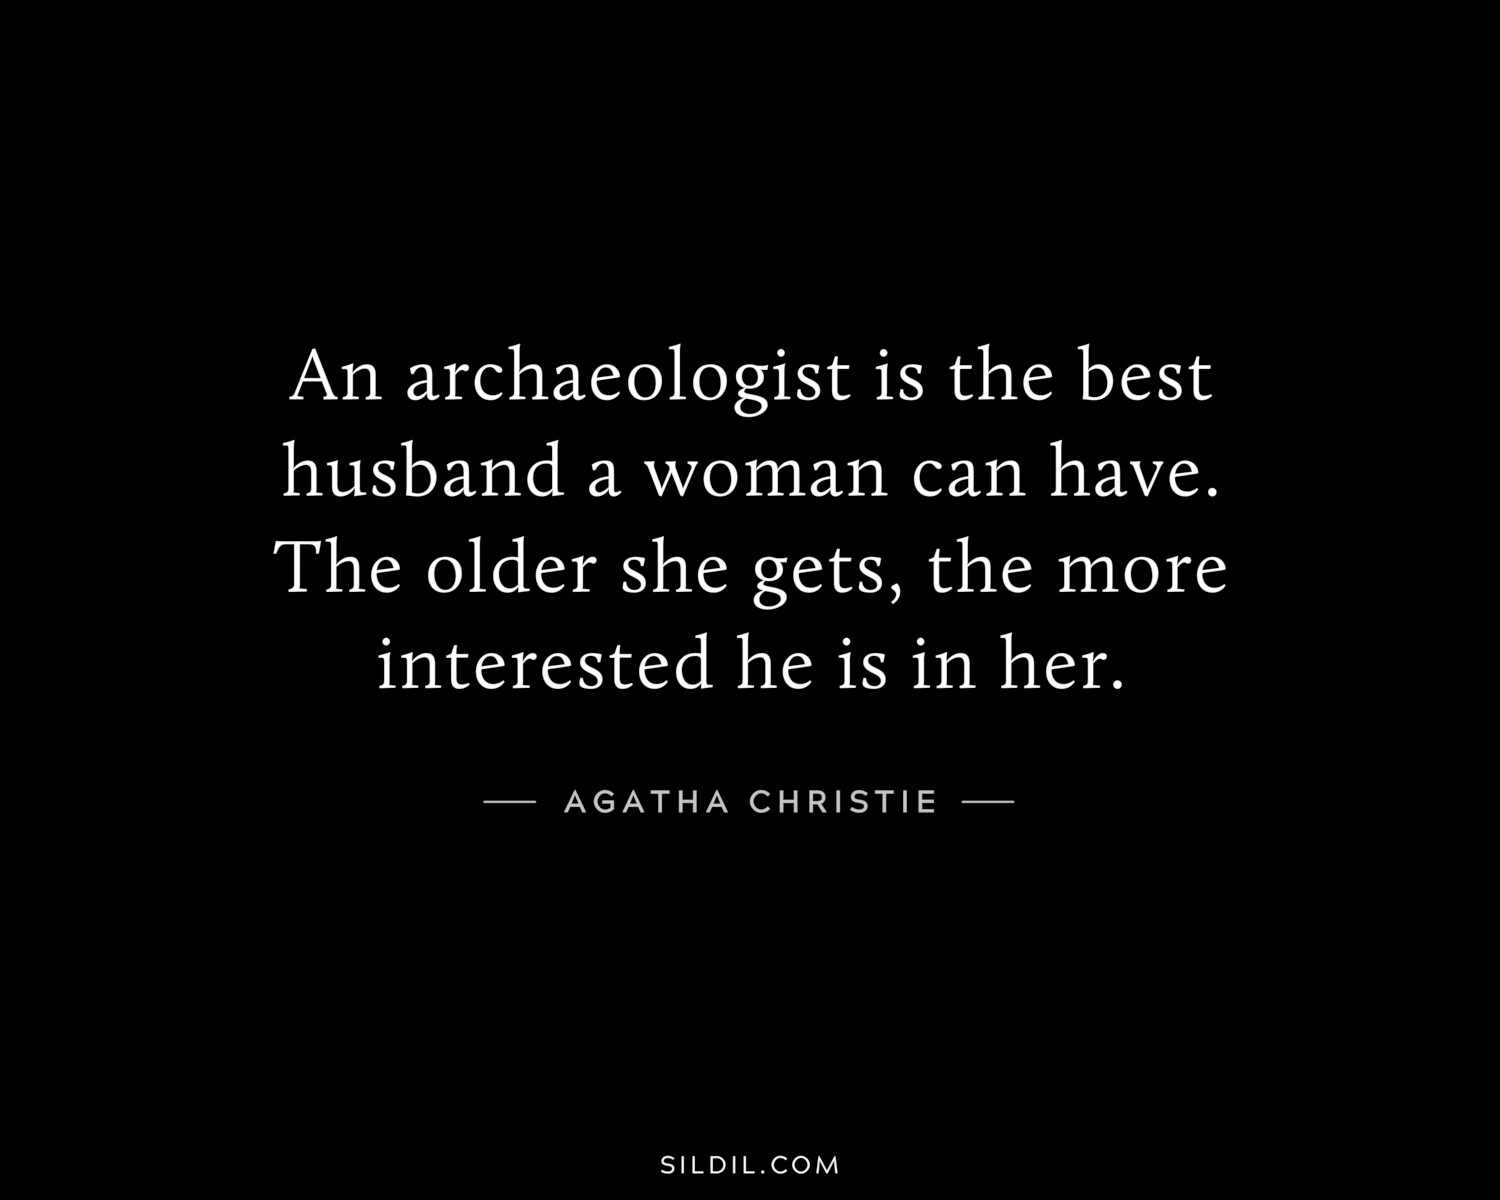 An archaeologist is the best husband a woman can have. The older she gets, the more interested he is in her.